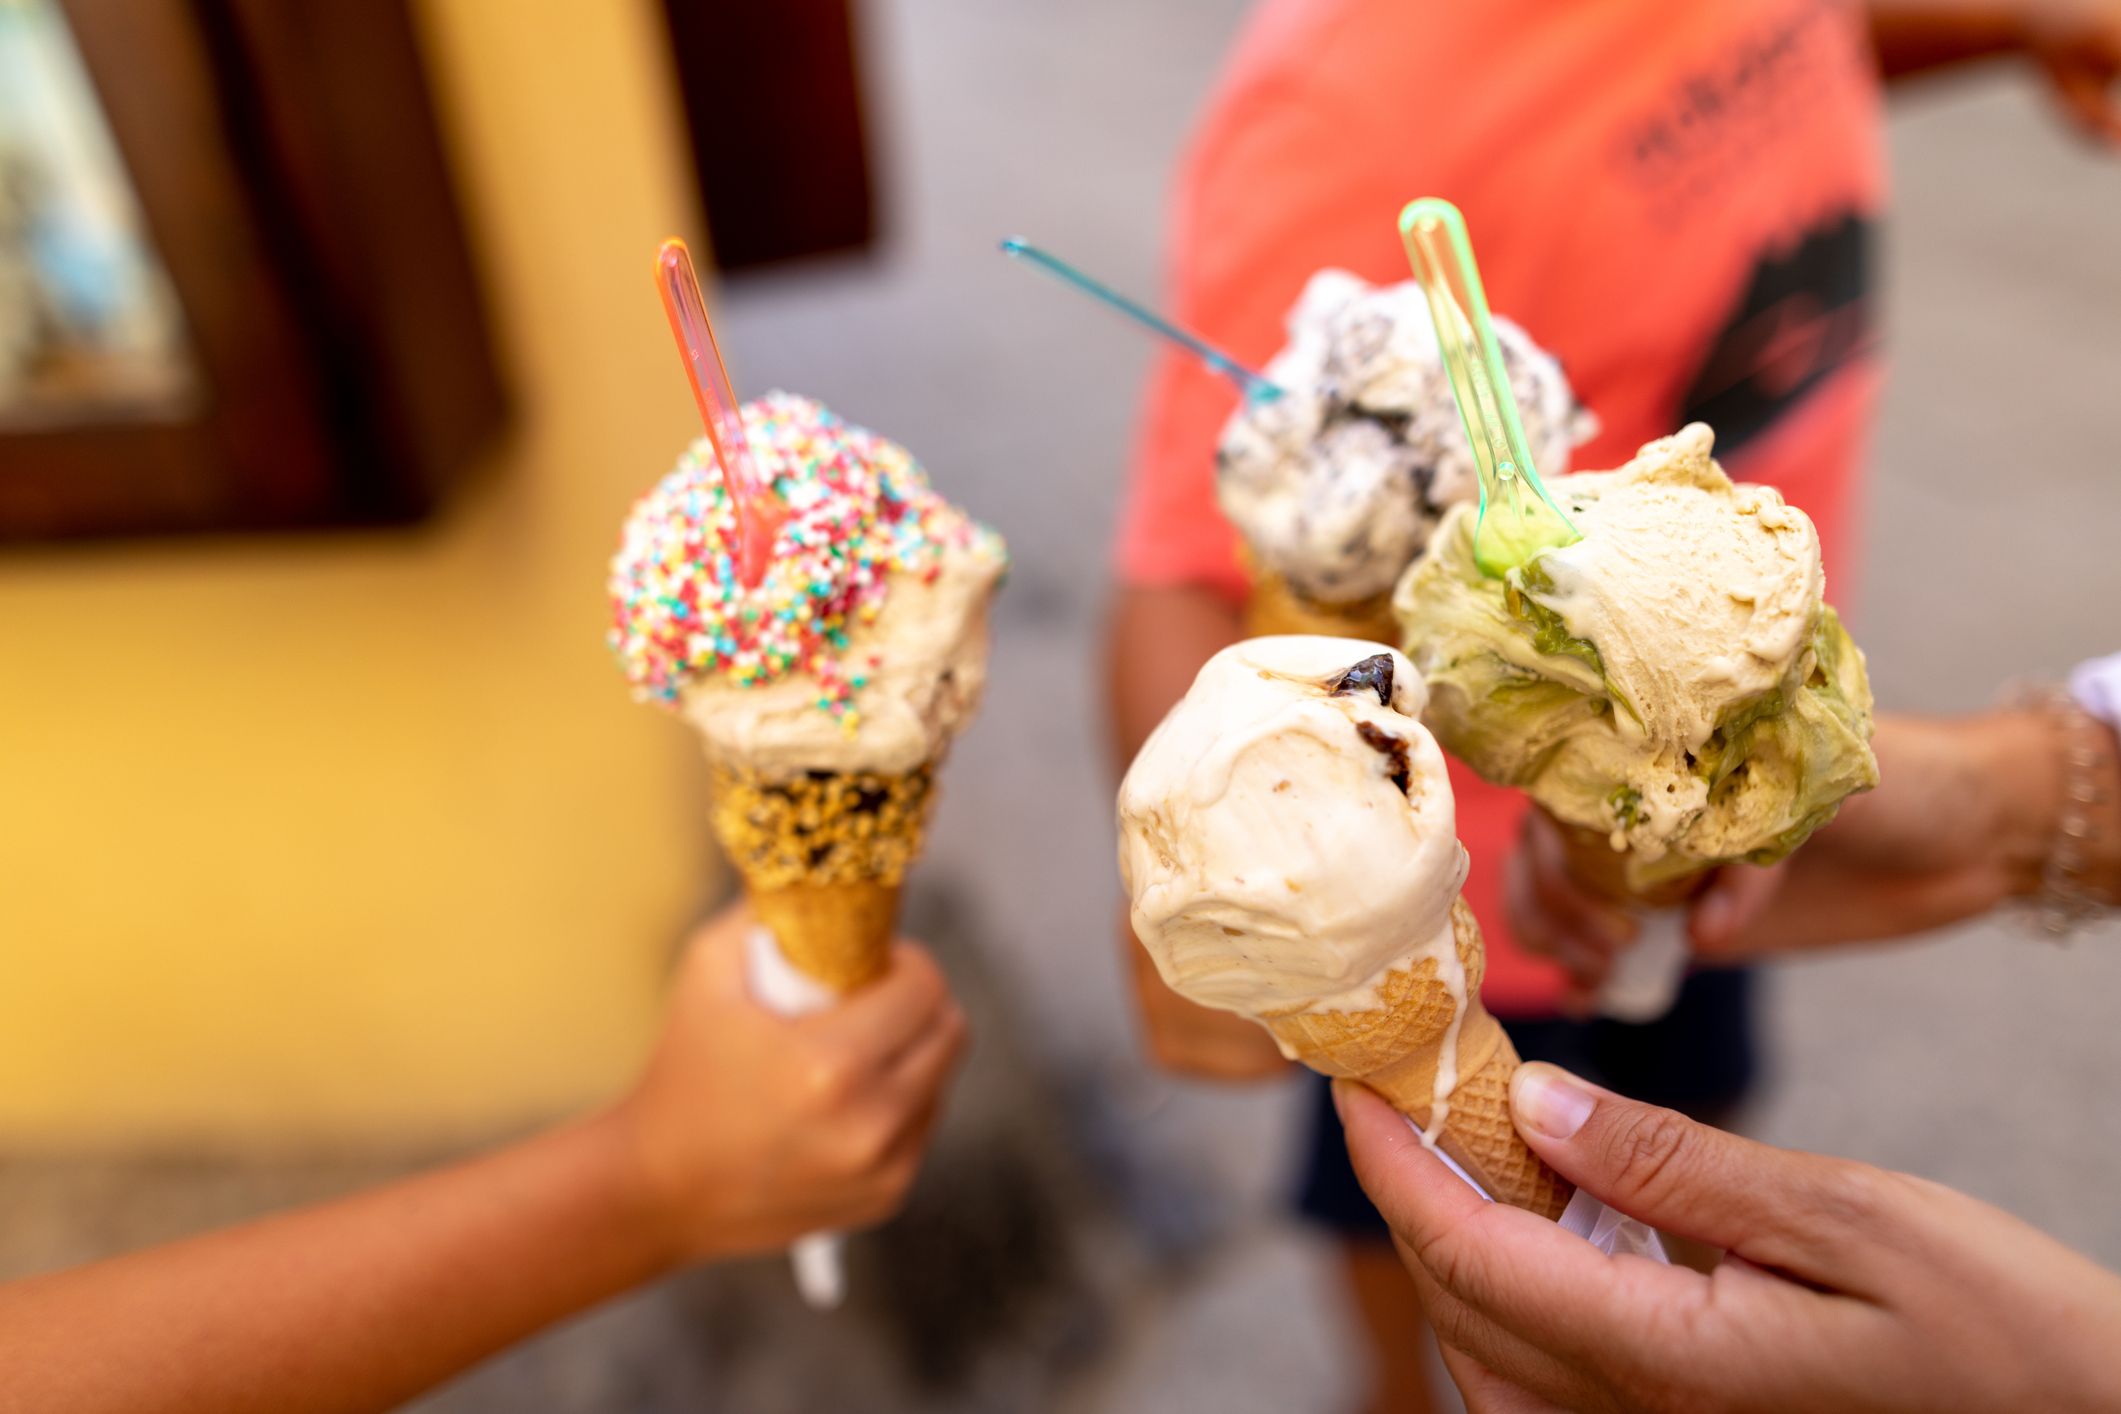 Top 20 Greatest Ice Cream Flavors of All Time